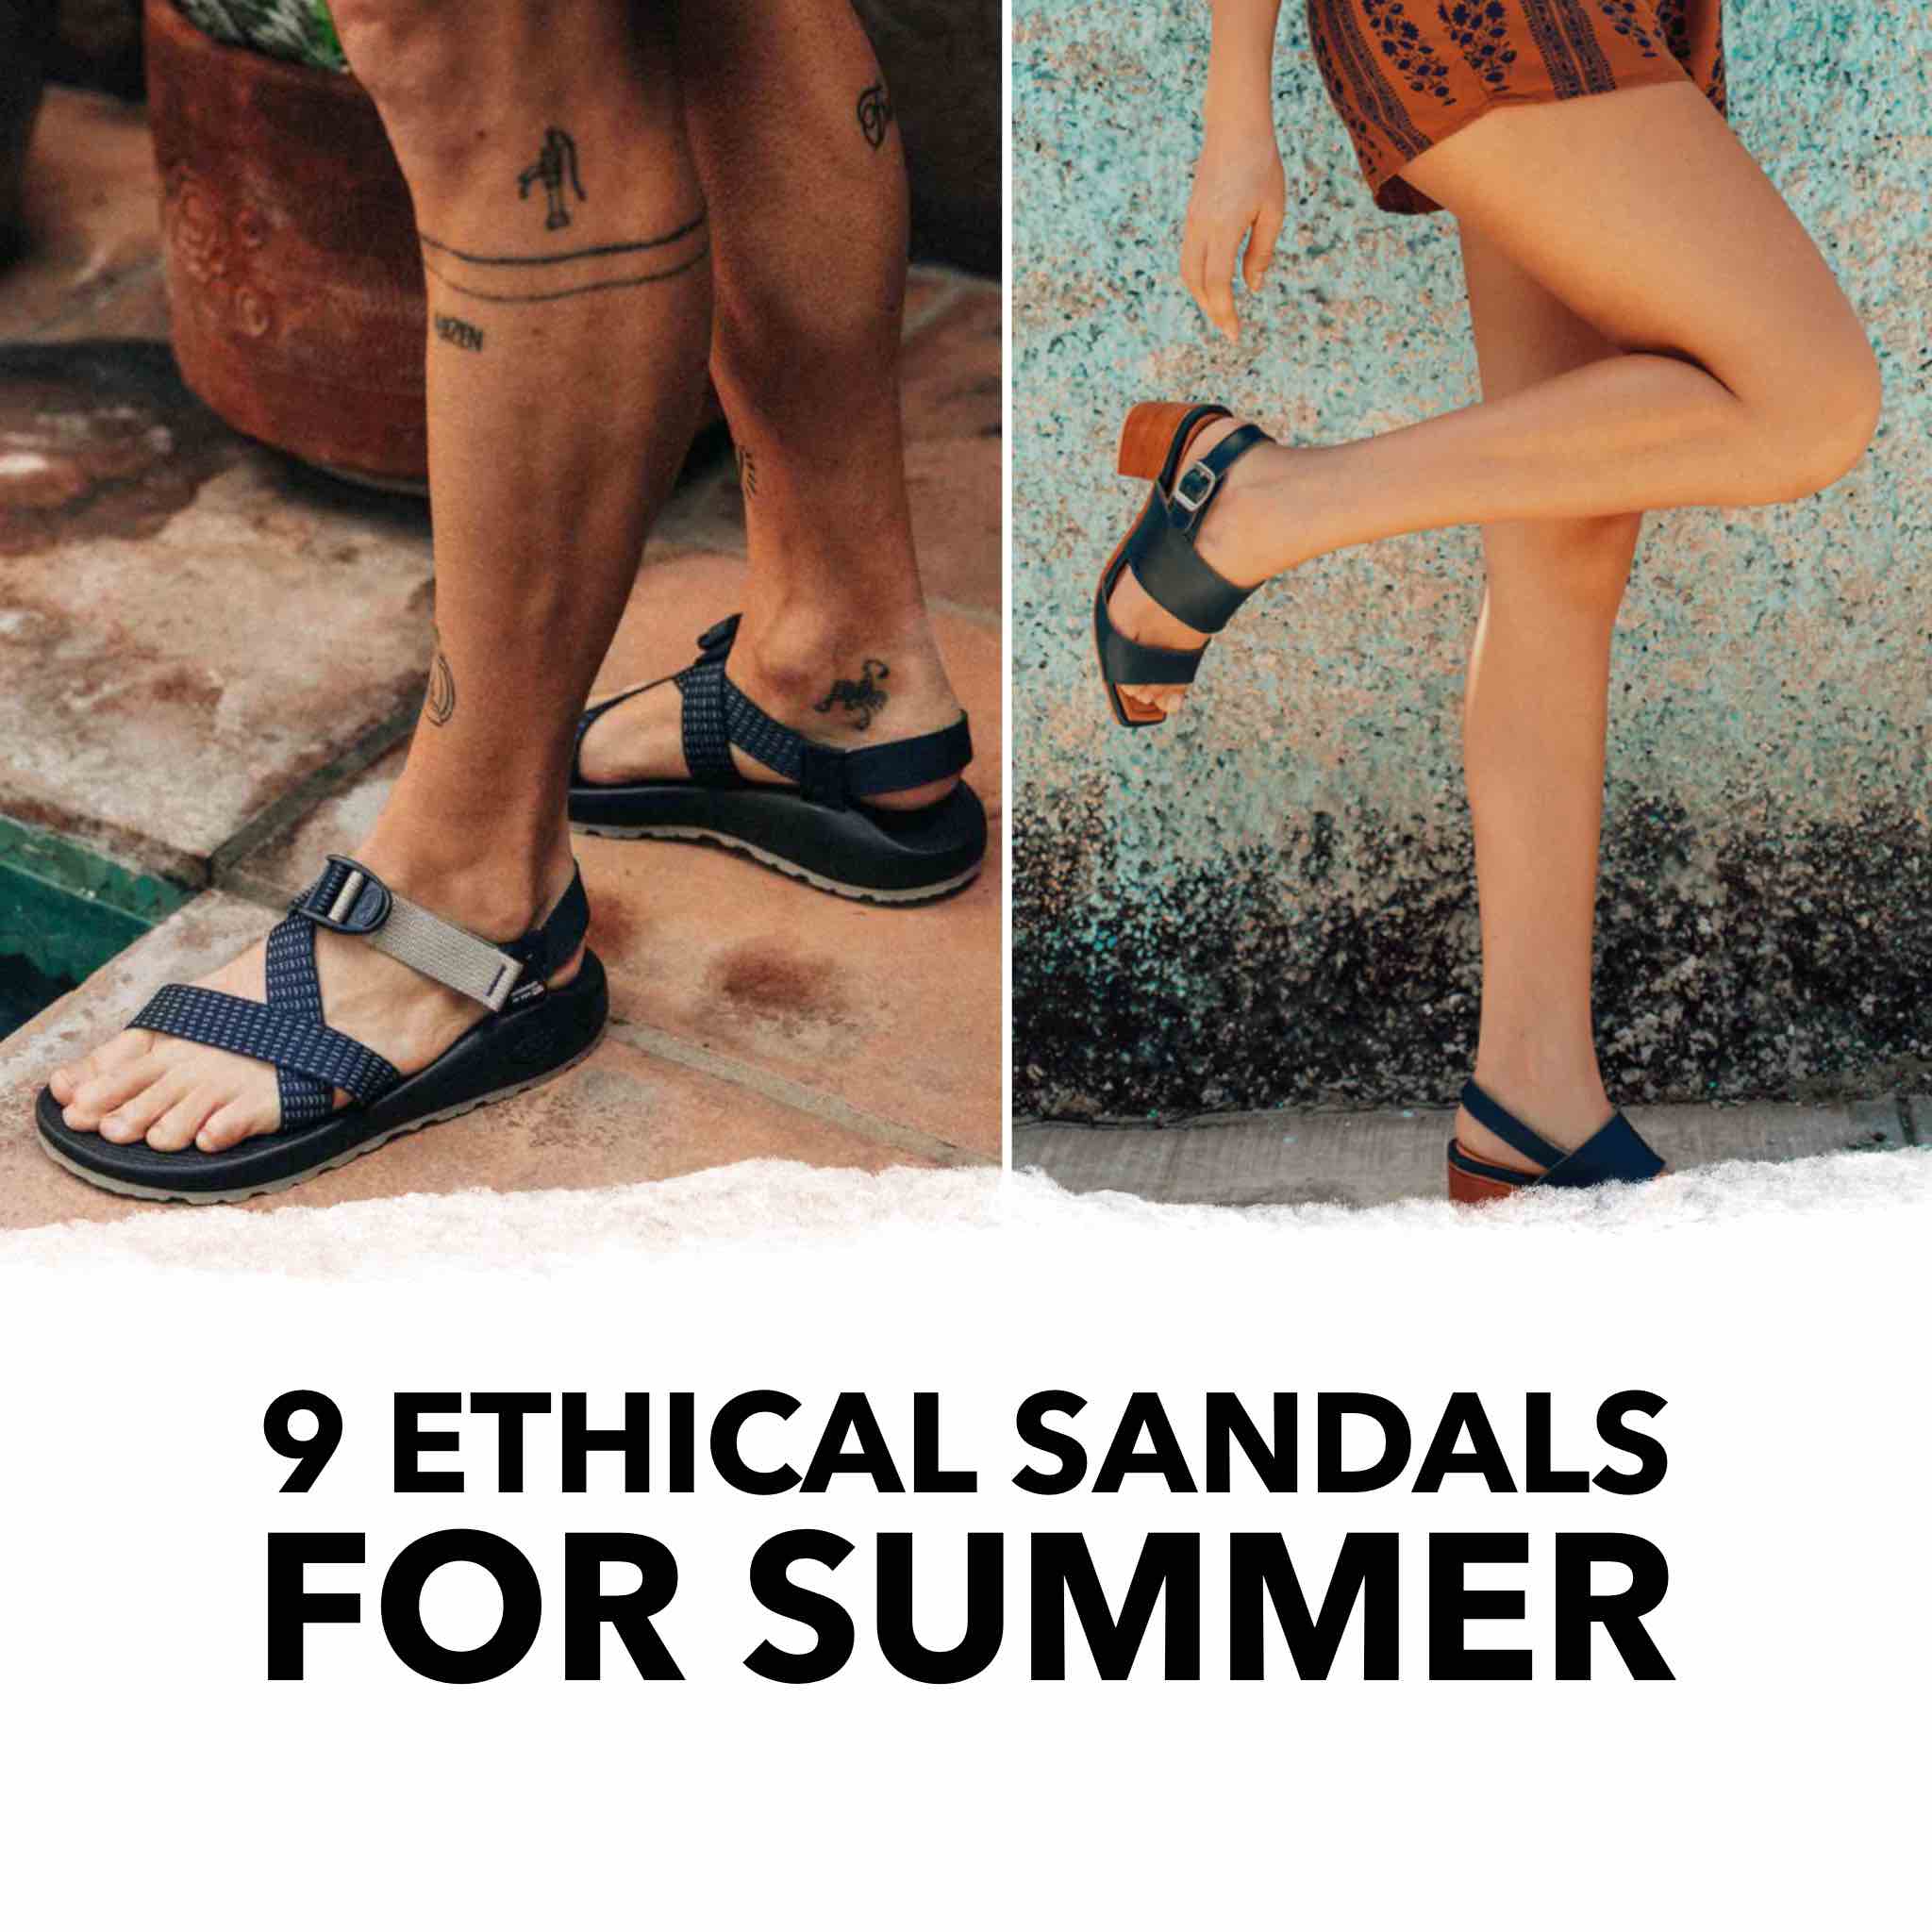 Top 9 Ethical Sandals for Summer Fun